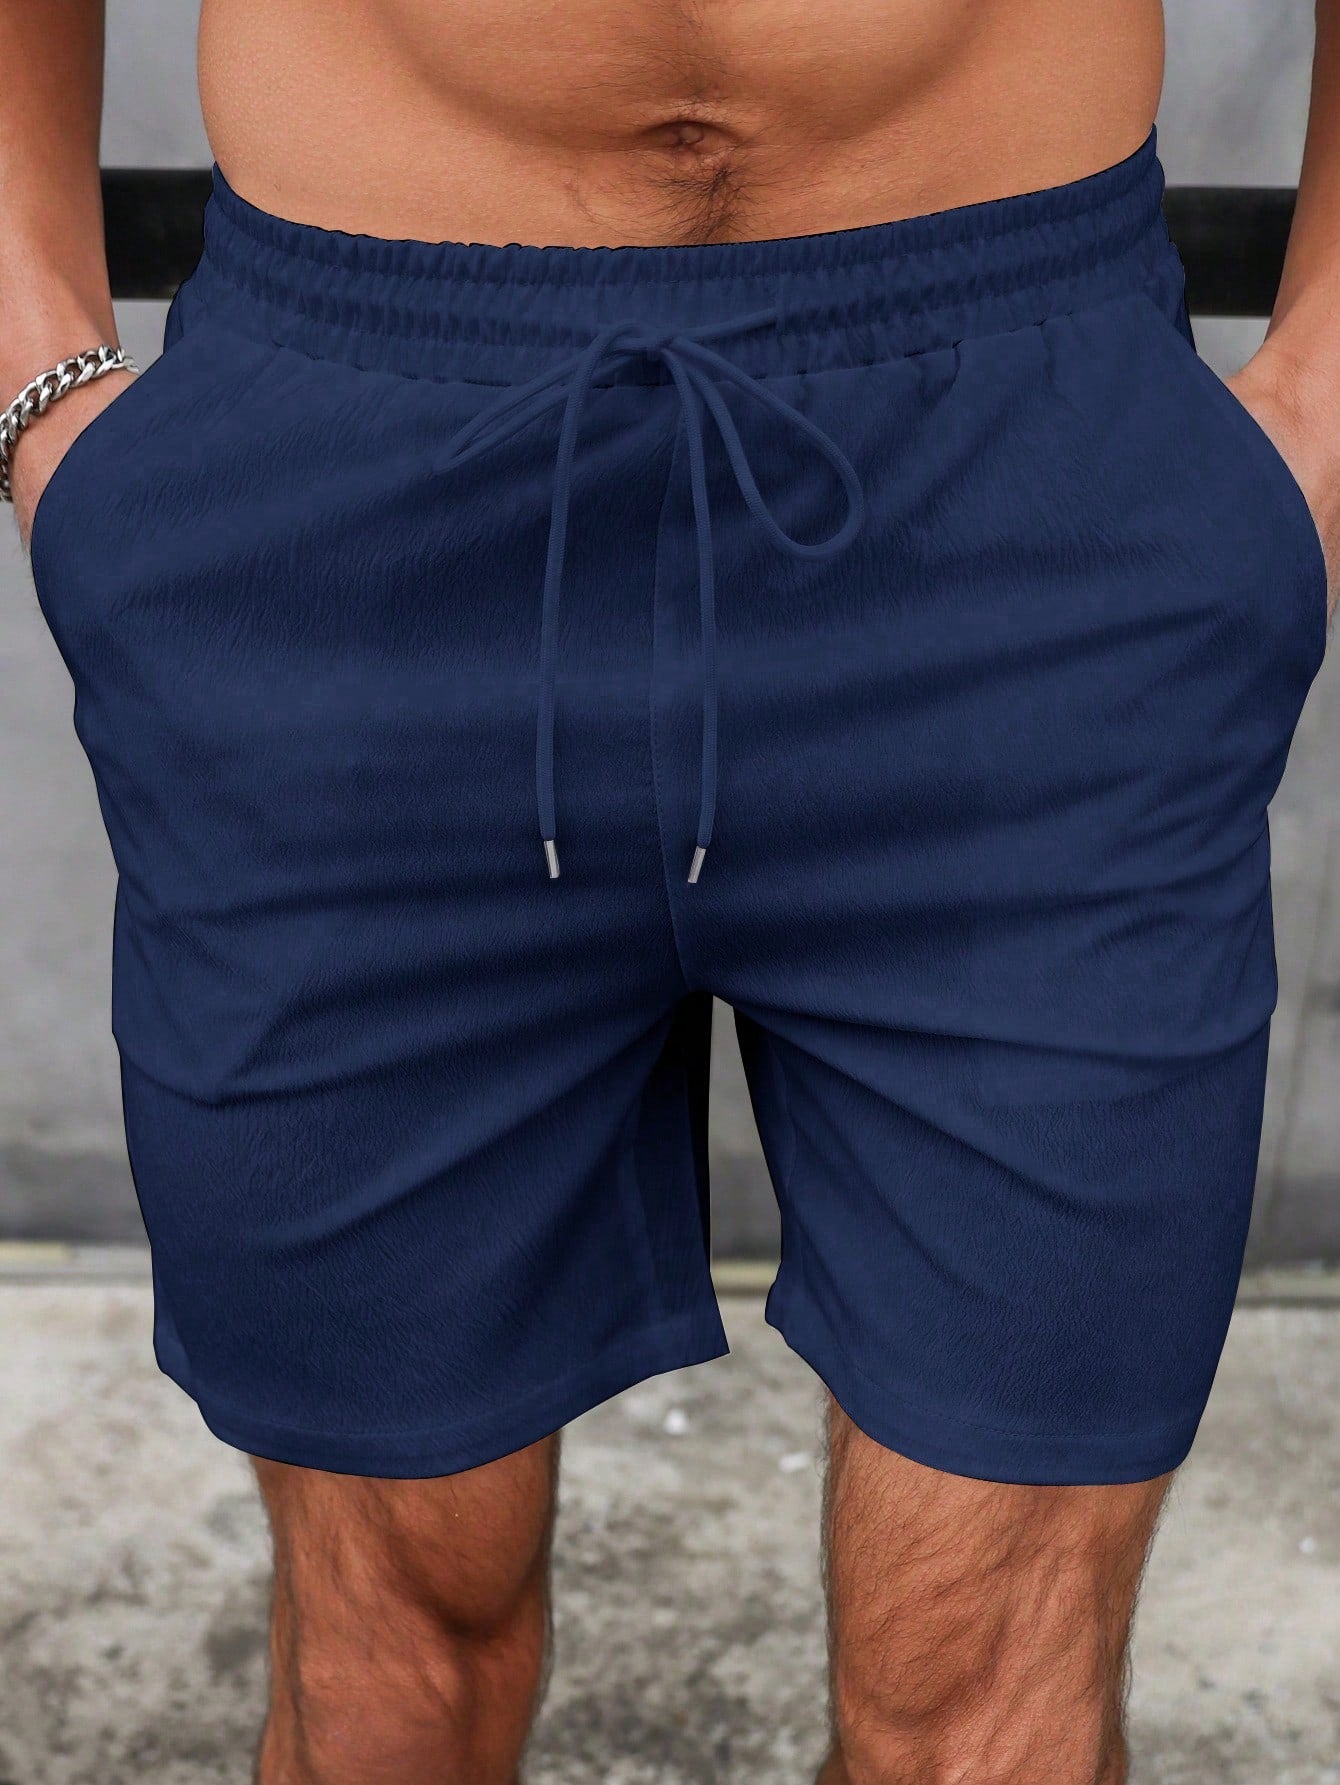 Men's Casual Drawstring Shorts with Pockets - Solid Color, Loose Fit, Polyester